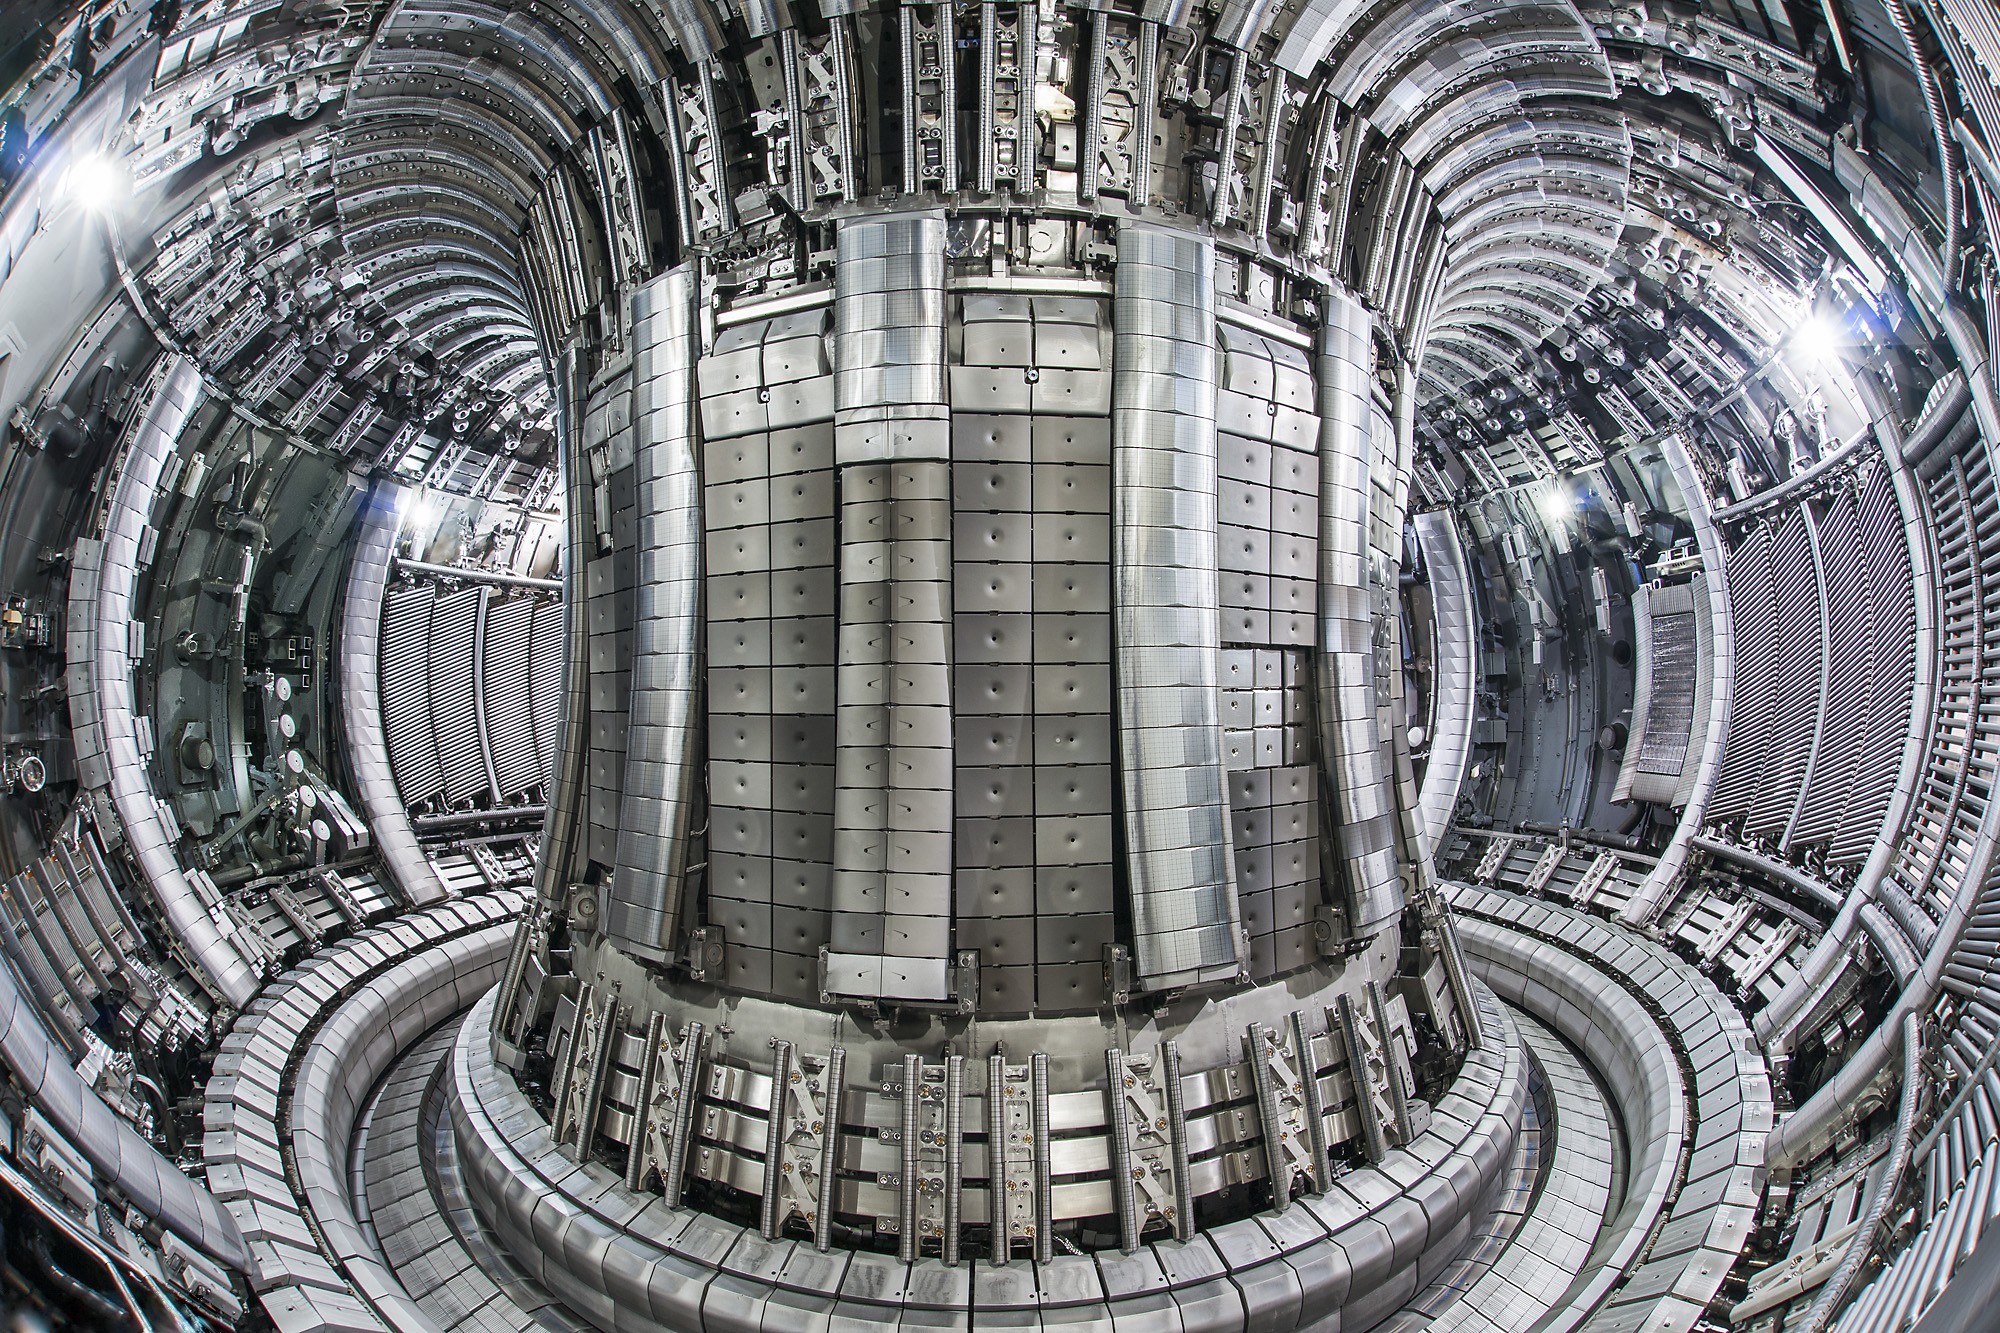 Interior view of a high-tech fusion reactor with a complex array of metallic panels and cylindrical structure.